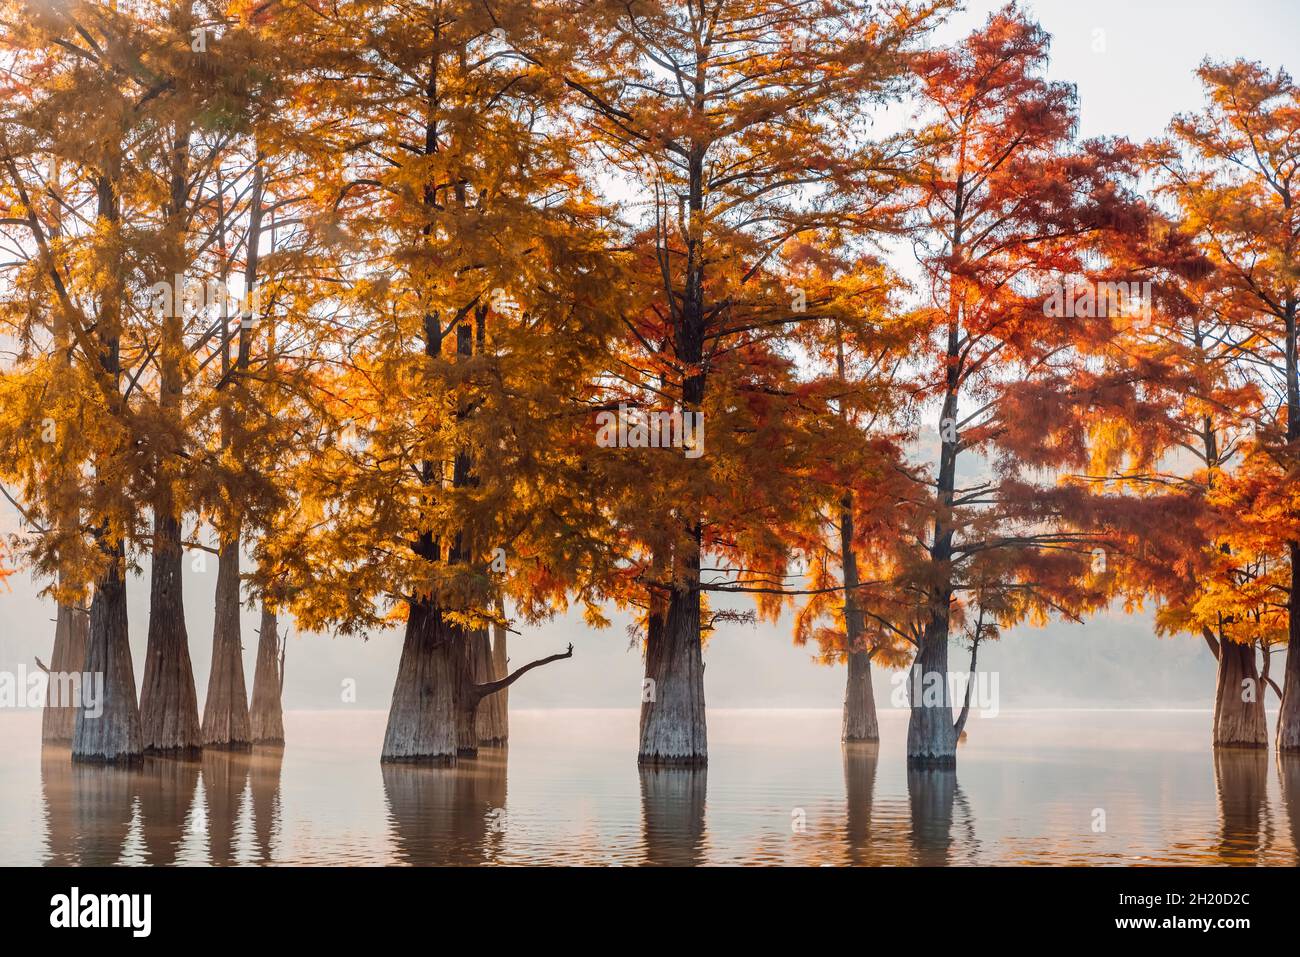 Taxodium distichum with red needles. Autumnal swamp cypresses and lake with reflection. Stock Photo